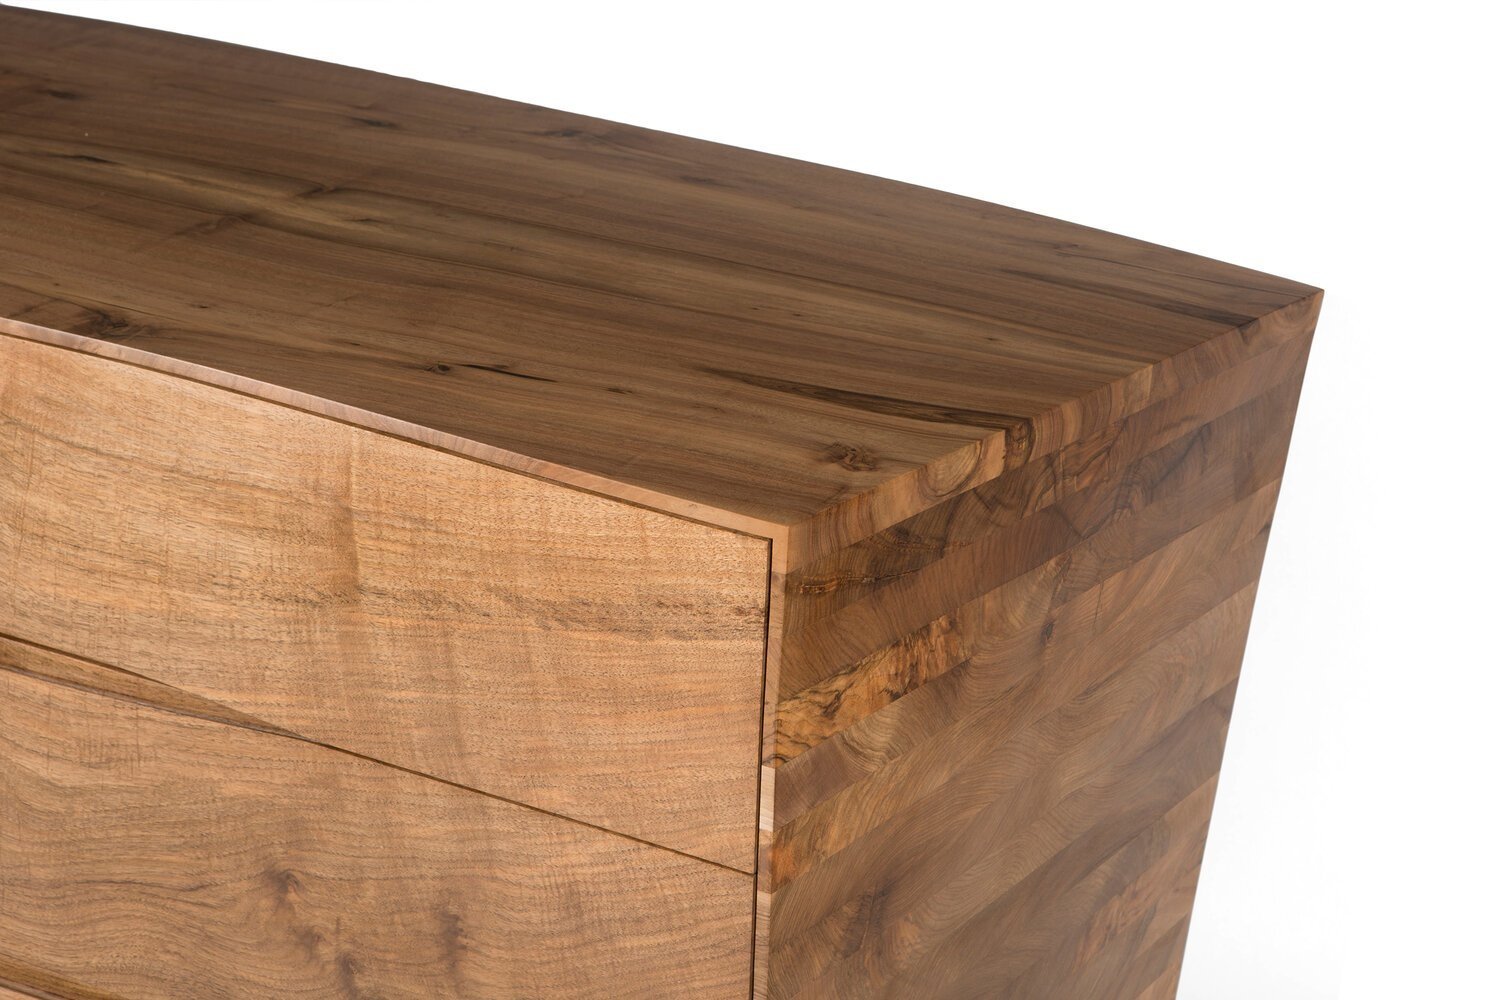 Chest-of-Drawers-of-Solid-Scottish-Walnut-with-Asymmetrical-Sides_2.jpg